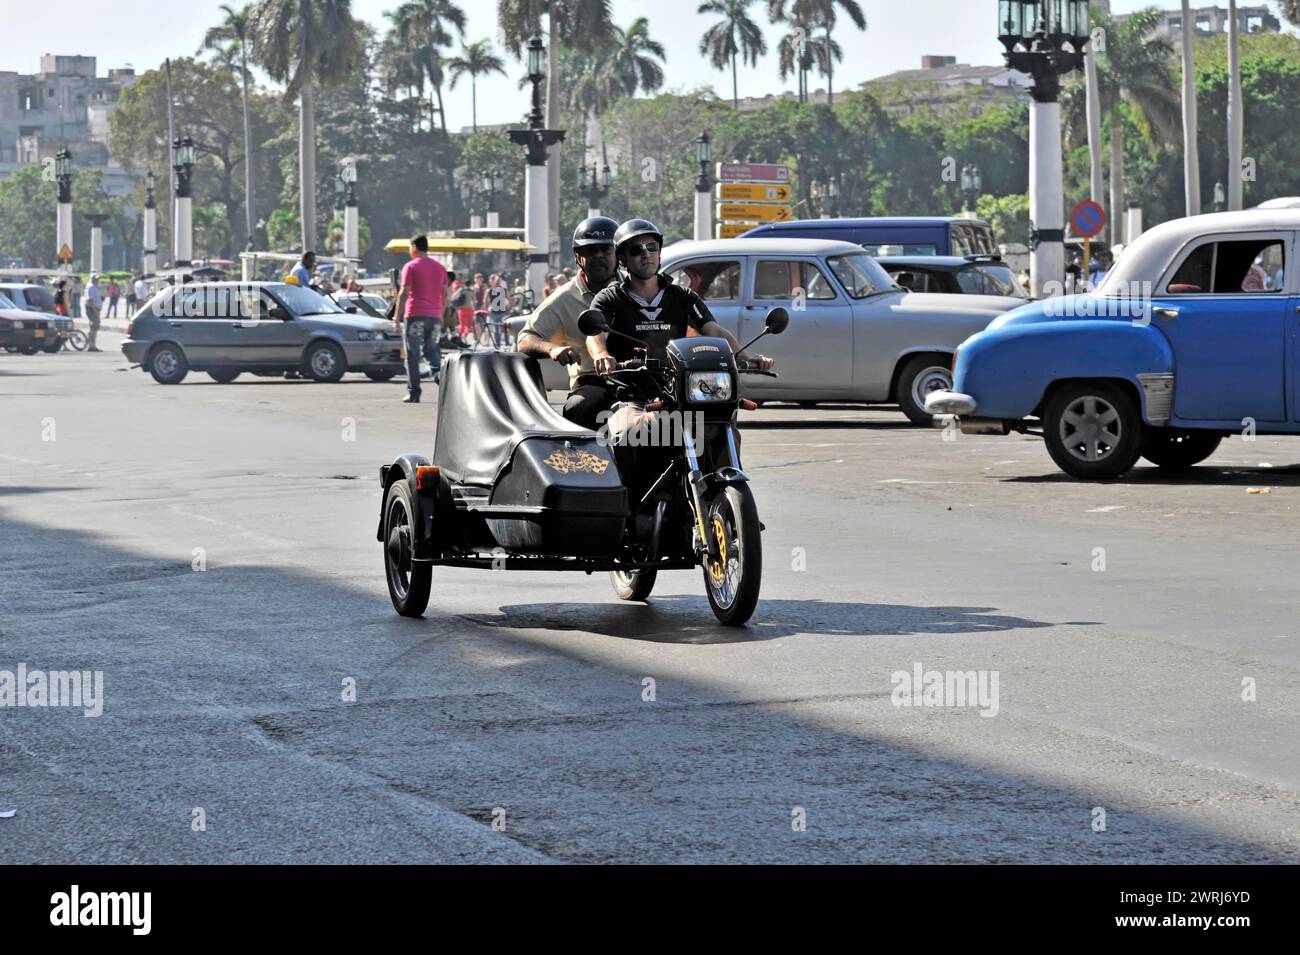 Motorbike with sidecar riding on a busy city street, Havana, Cuba, Central America Stock Photo